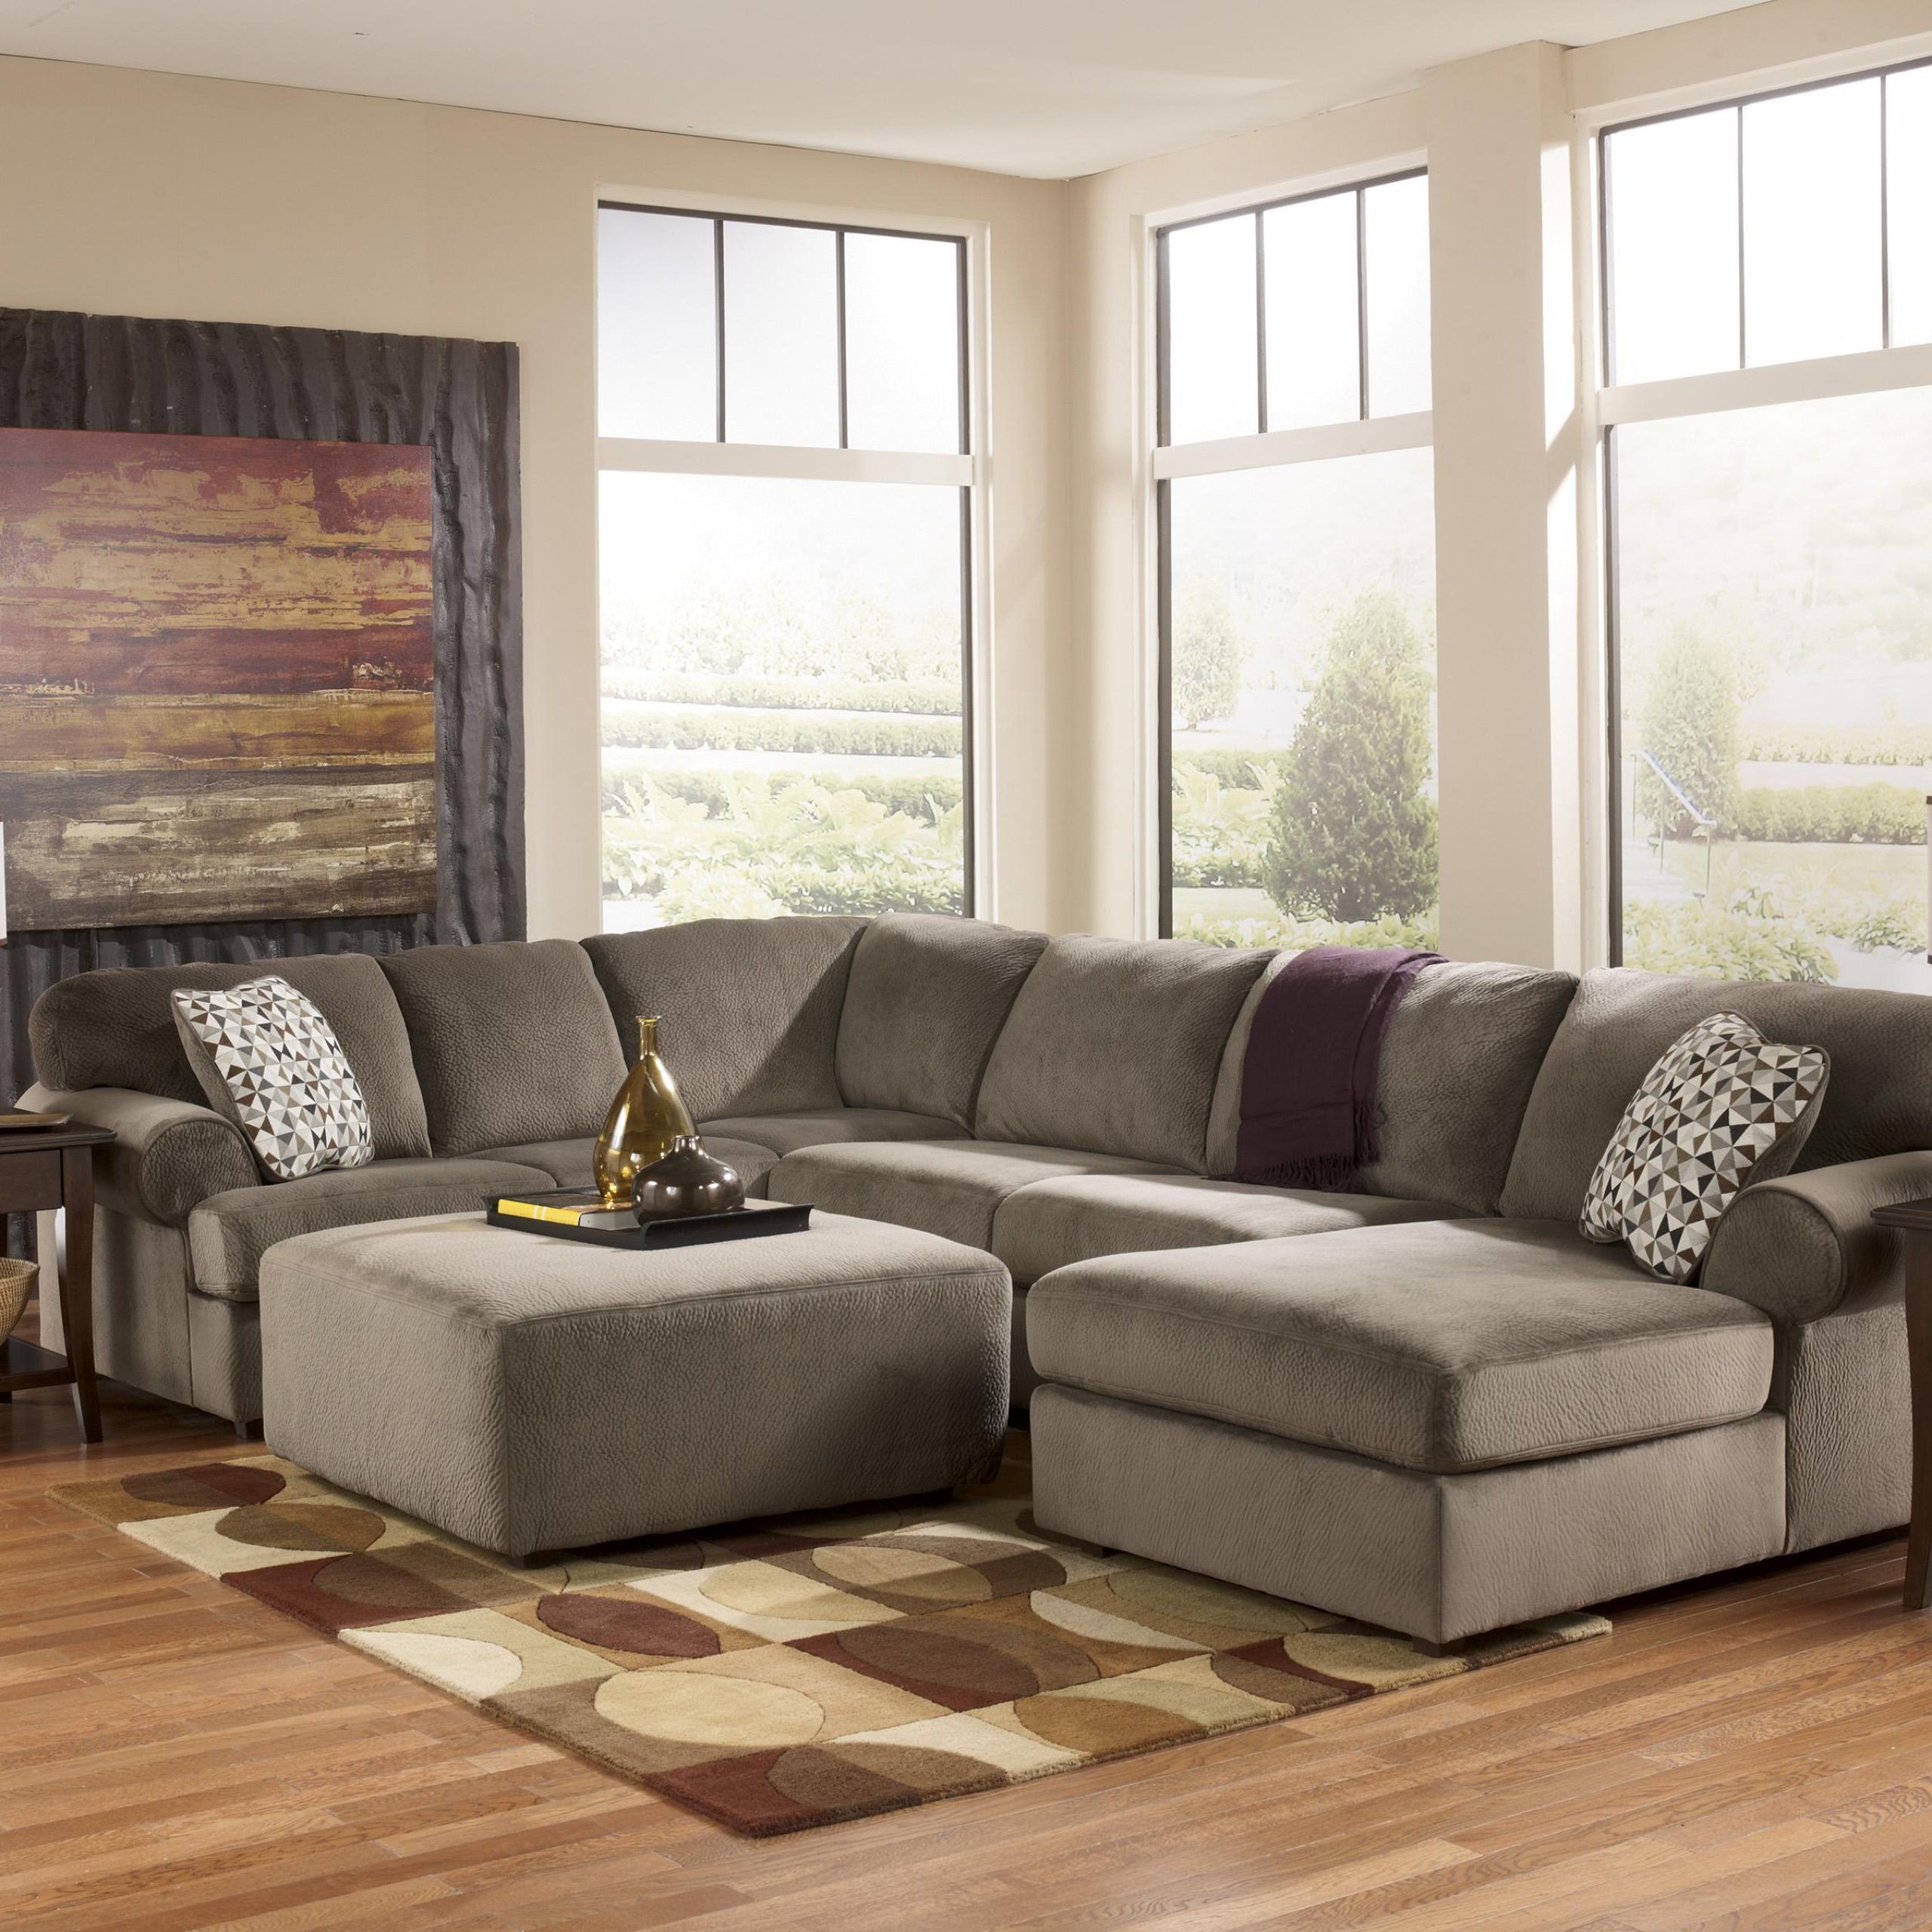 Casual Sectional Sofa With Left Chaisesignature Design For Popular Hannah Left Sectional Sofas (View 20 of 25)